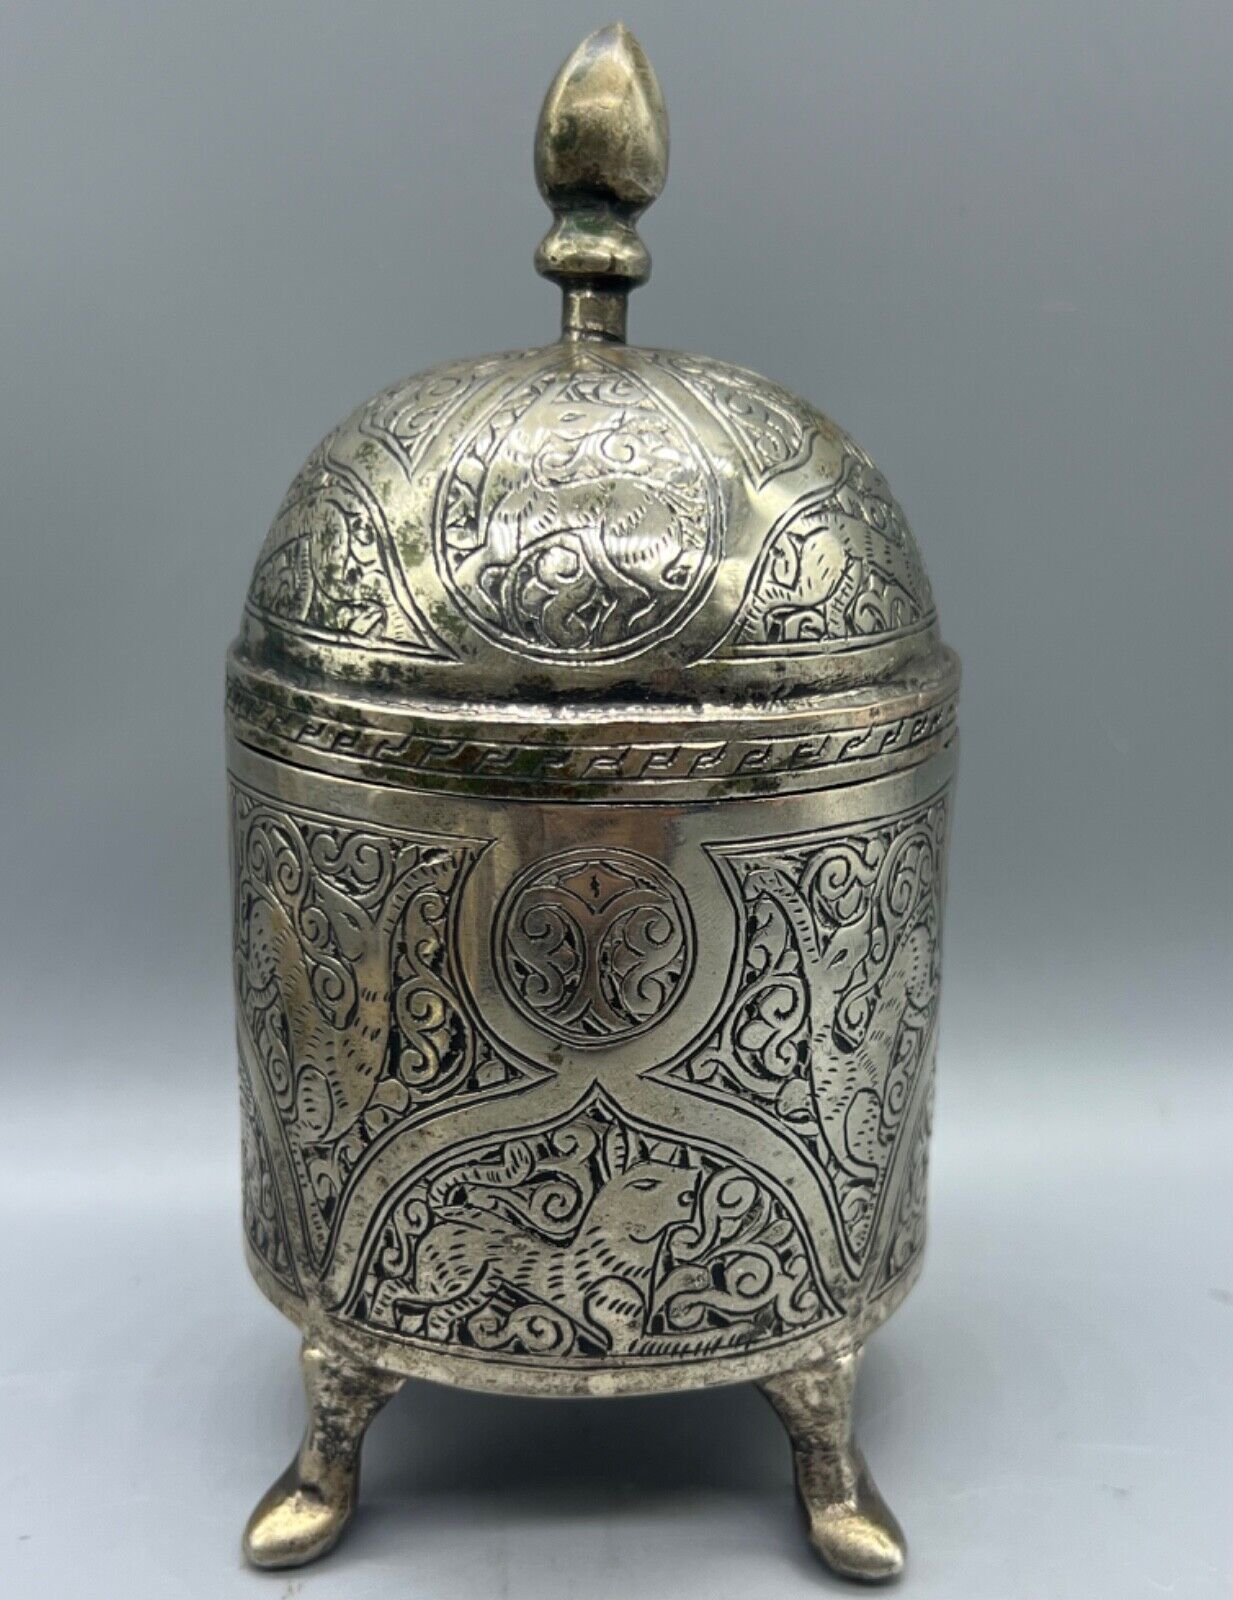 Very Beautiful Vintage Old Central Asian Mixed Sliver Jewelry Box With Engraved